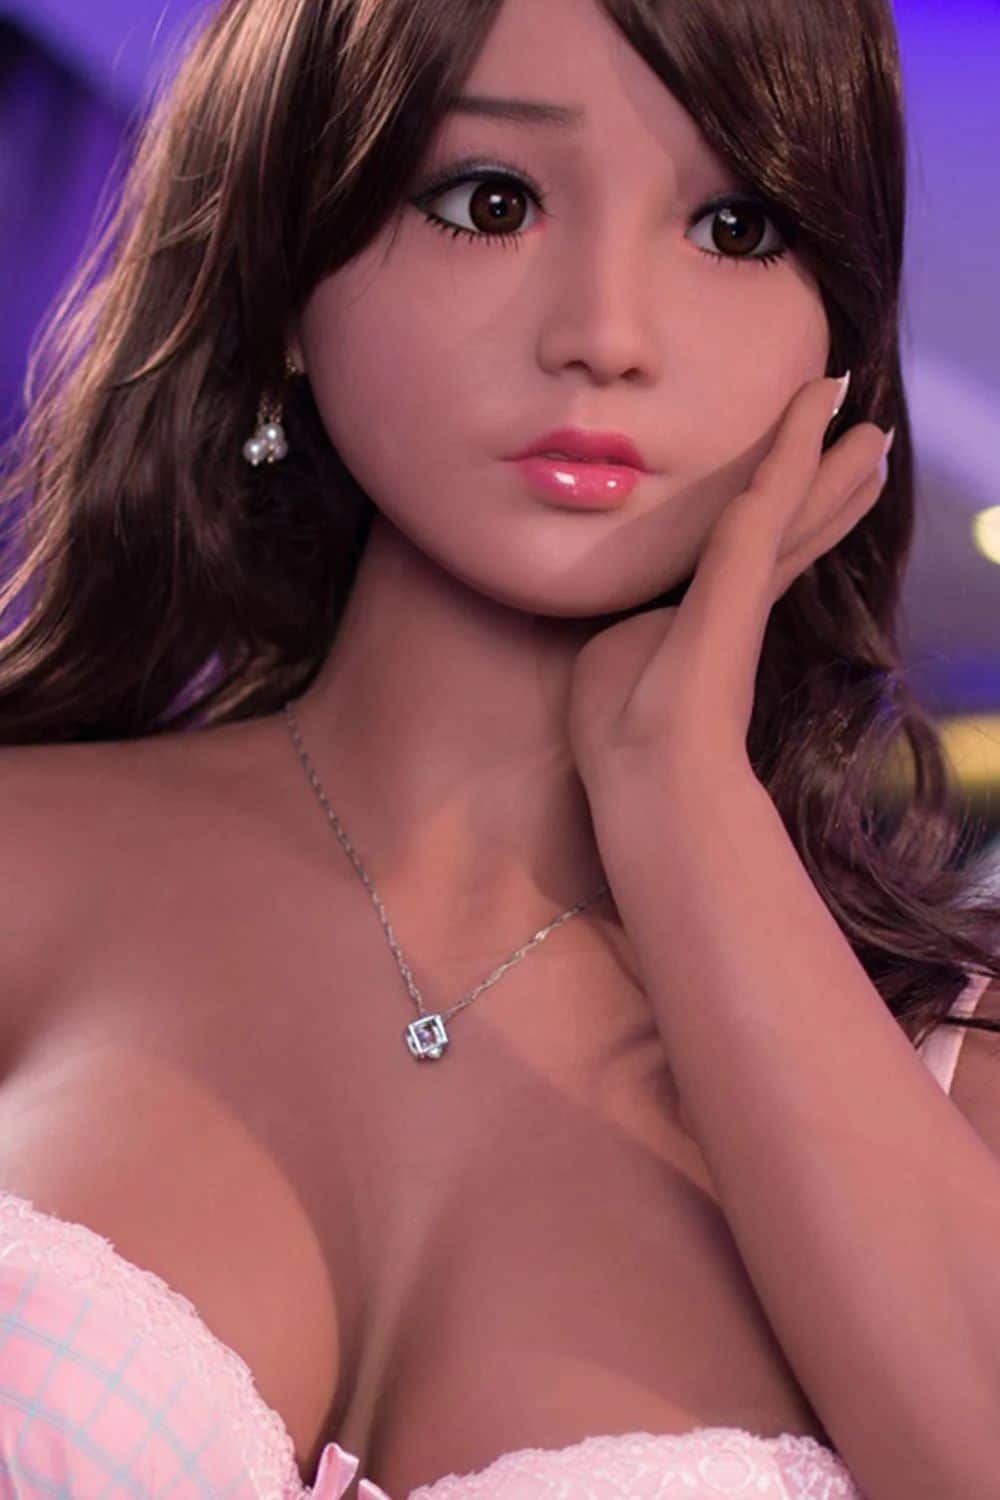 Lesley real doll3